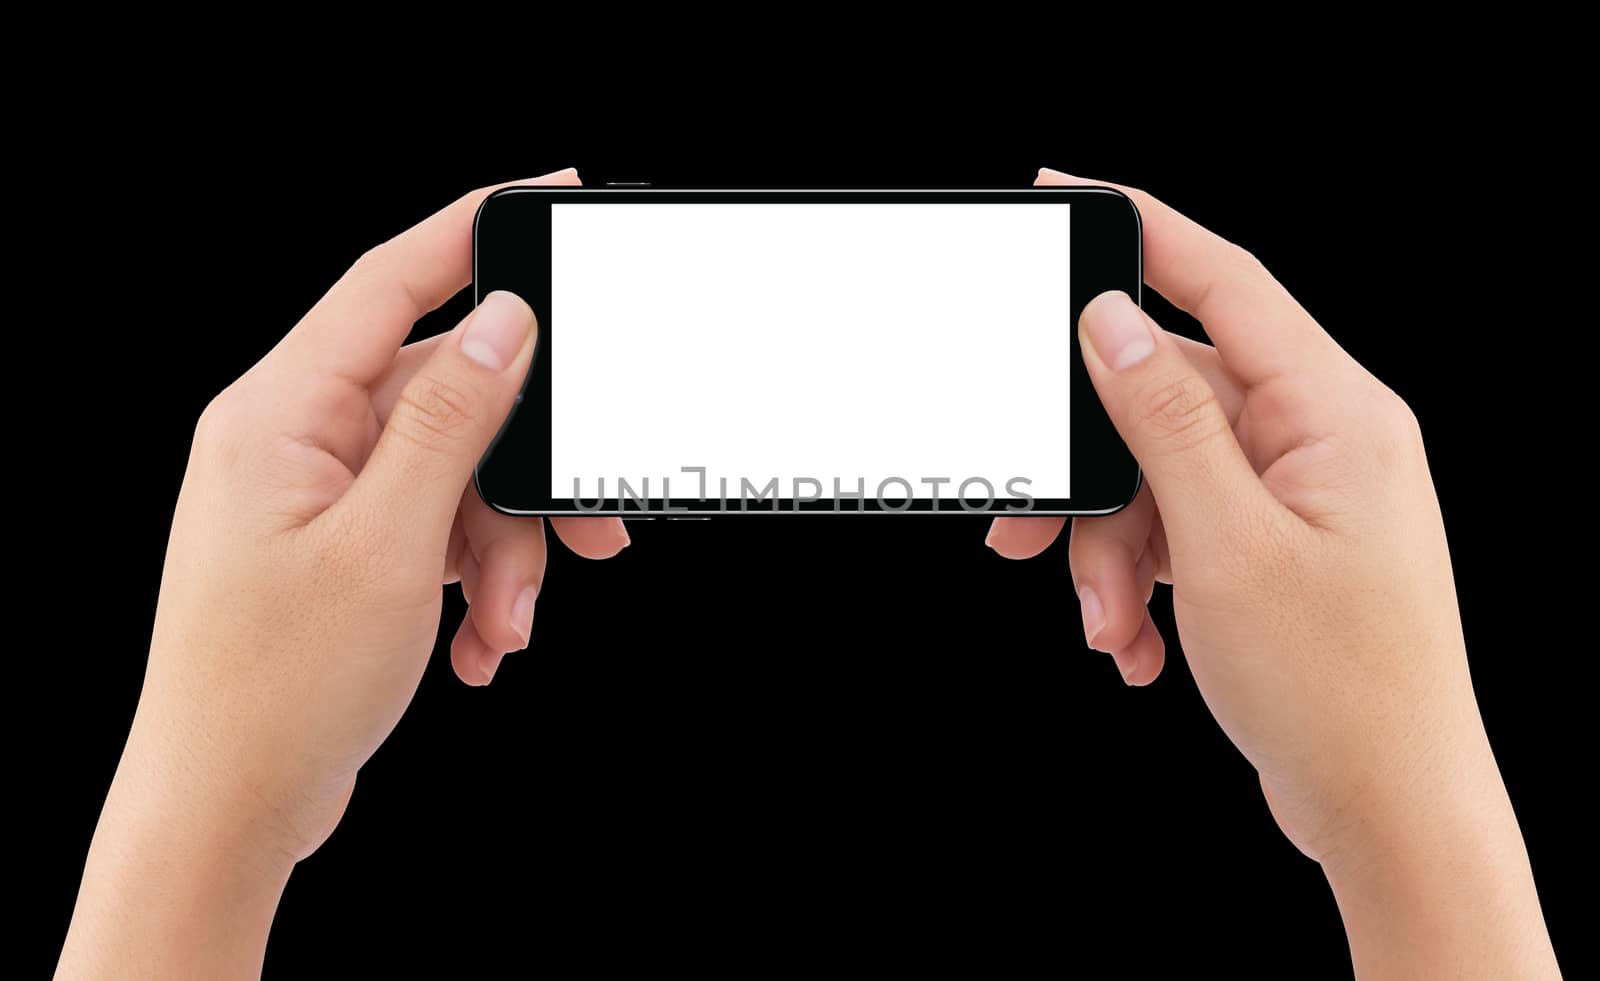 Isolated human two hands holding black mobile smart phone mockup on black background